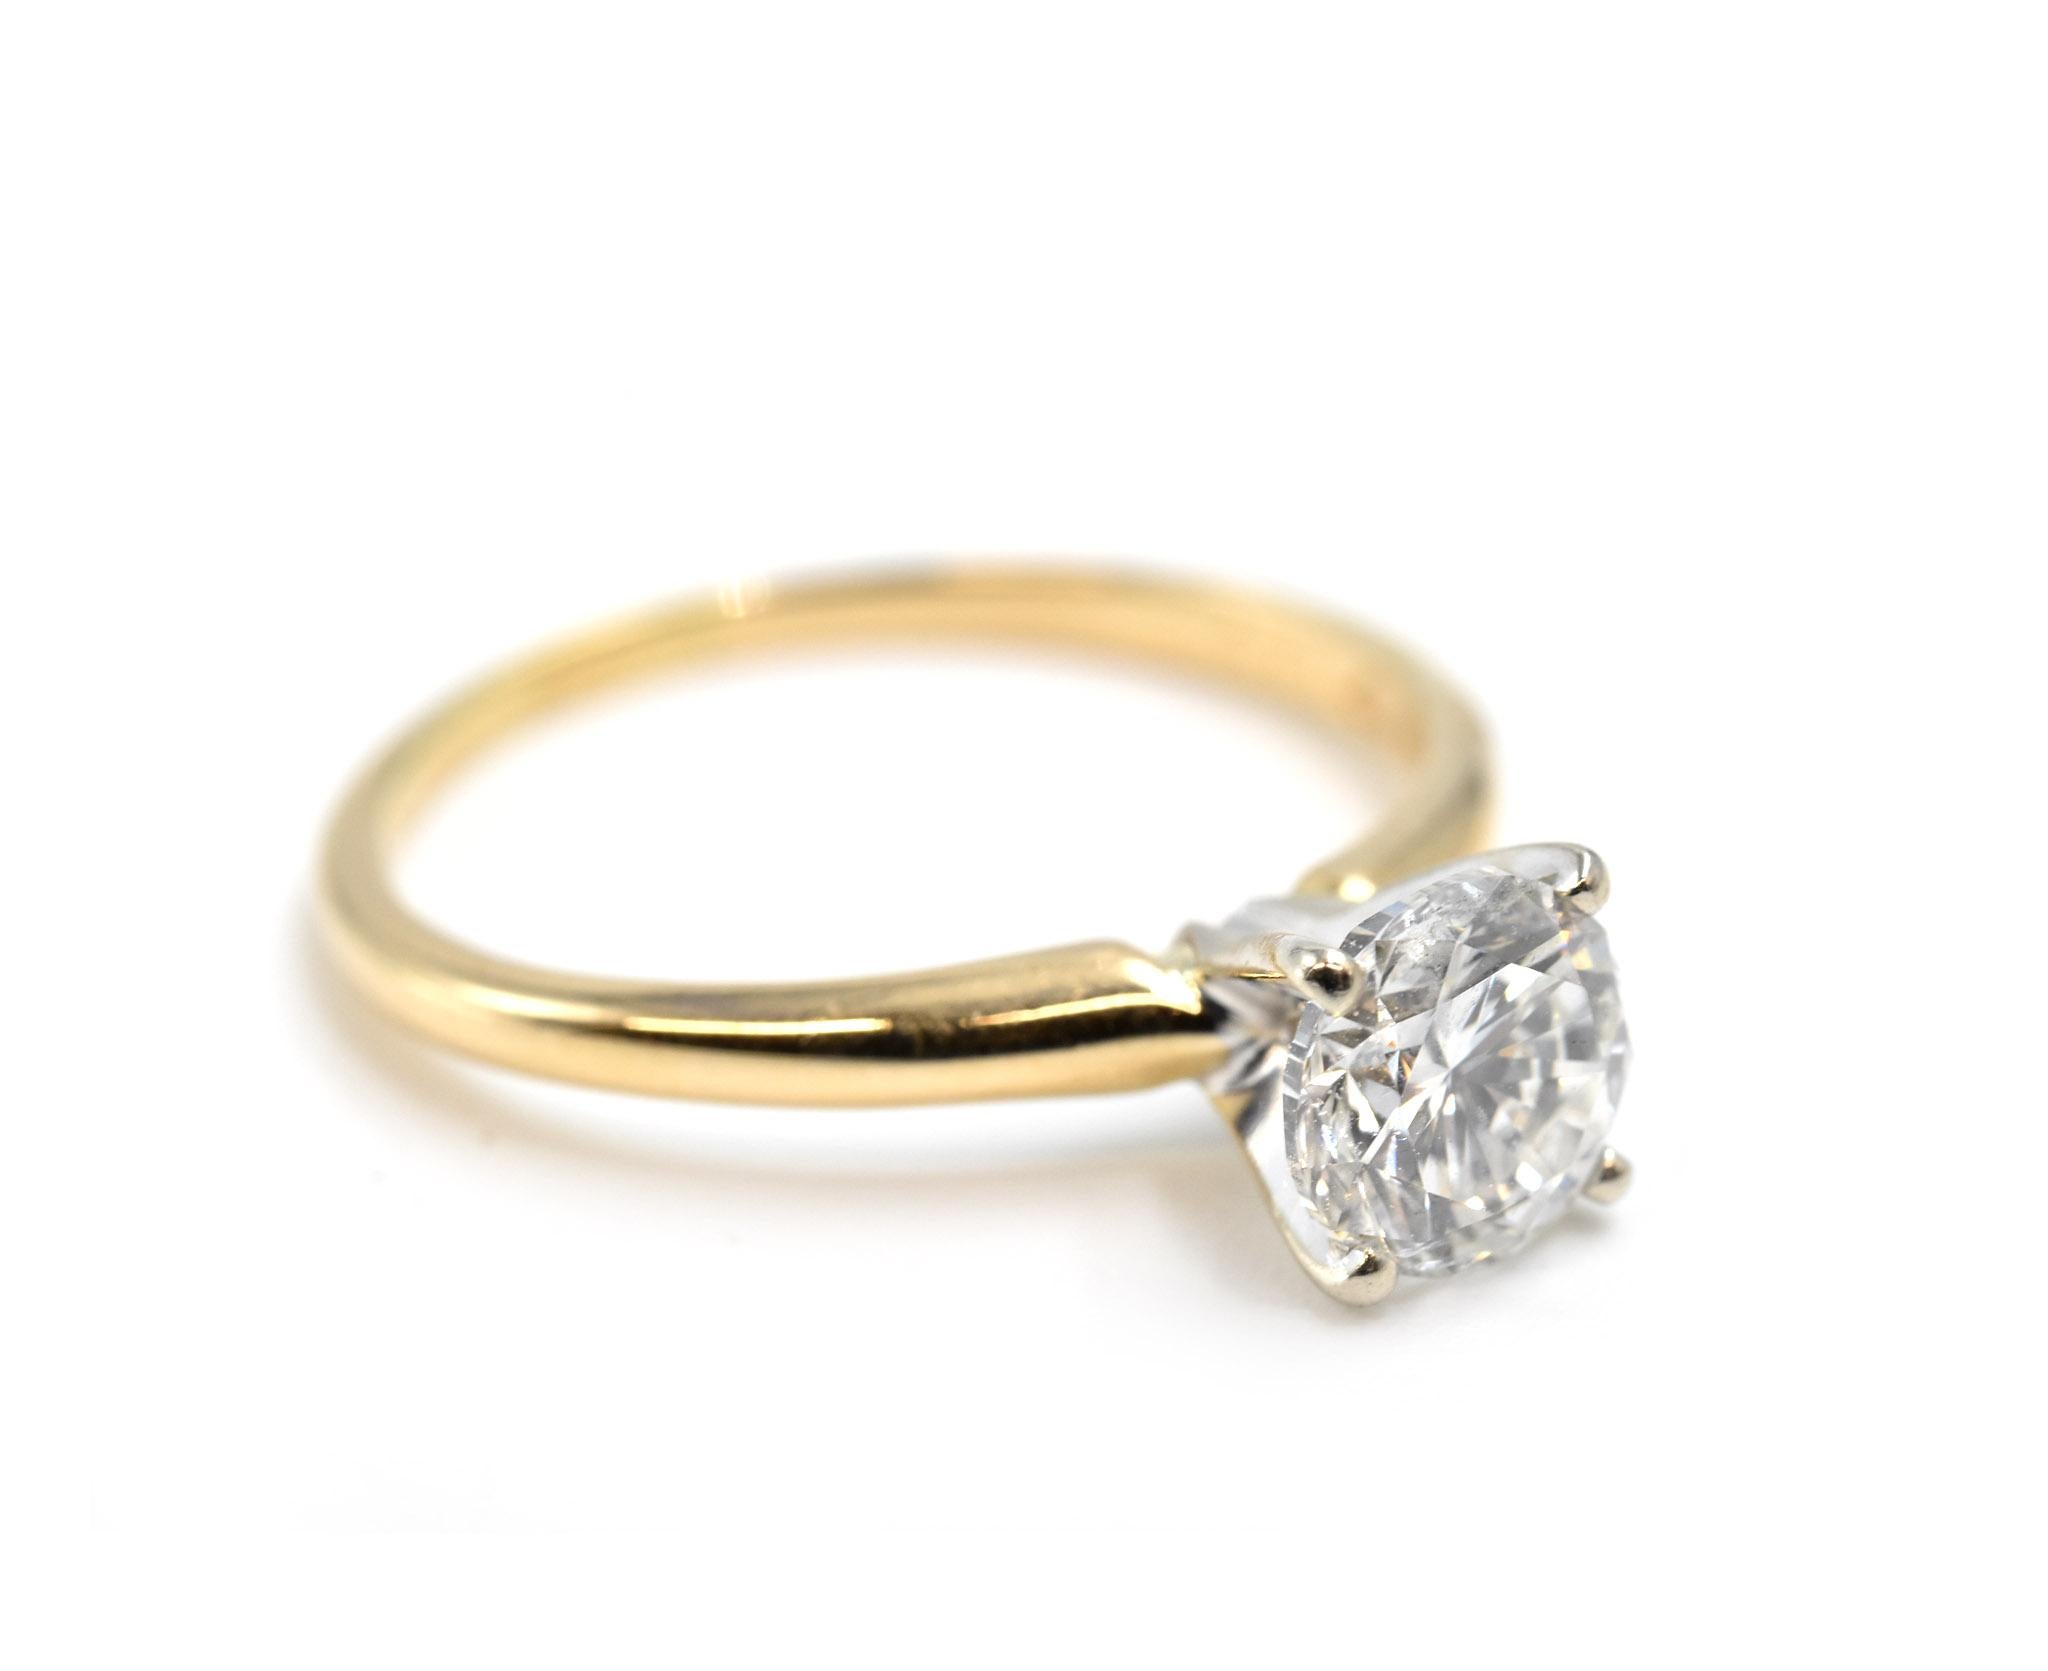 Designer: custom design
Material: 14k yellow gold
Center Stone: 1.04 carat round brilliant cut diamond
Color: H
Clarity: SI2
Ring Size: 7 1/2 (please allow two additional shipping days for ring to be sized)  
Weight: 2.22 grams
